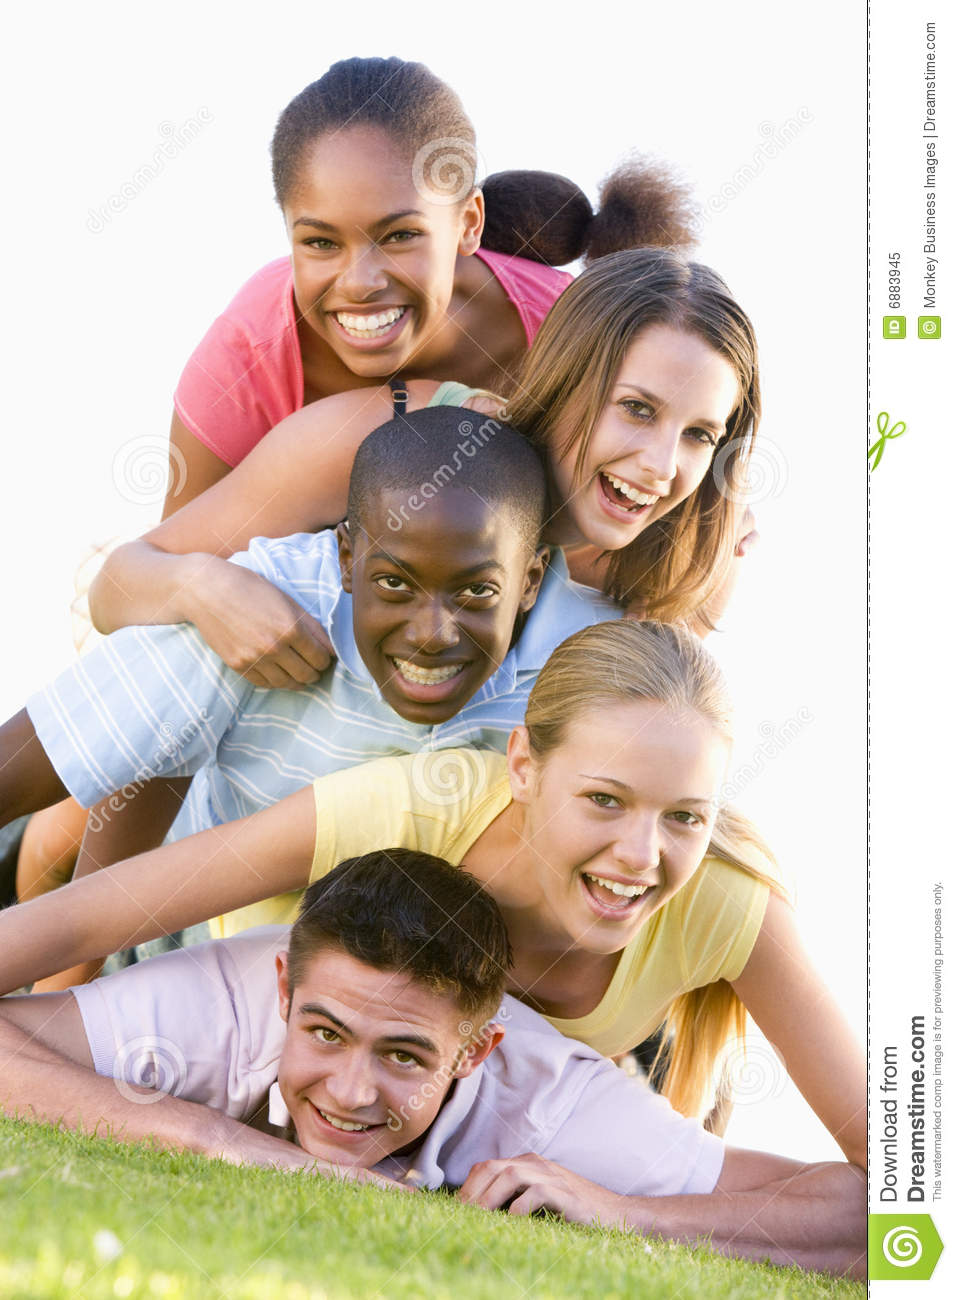 Group Of Teenagers Having Fun Outdoors Royalty Free Stock Photo    